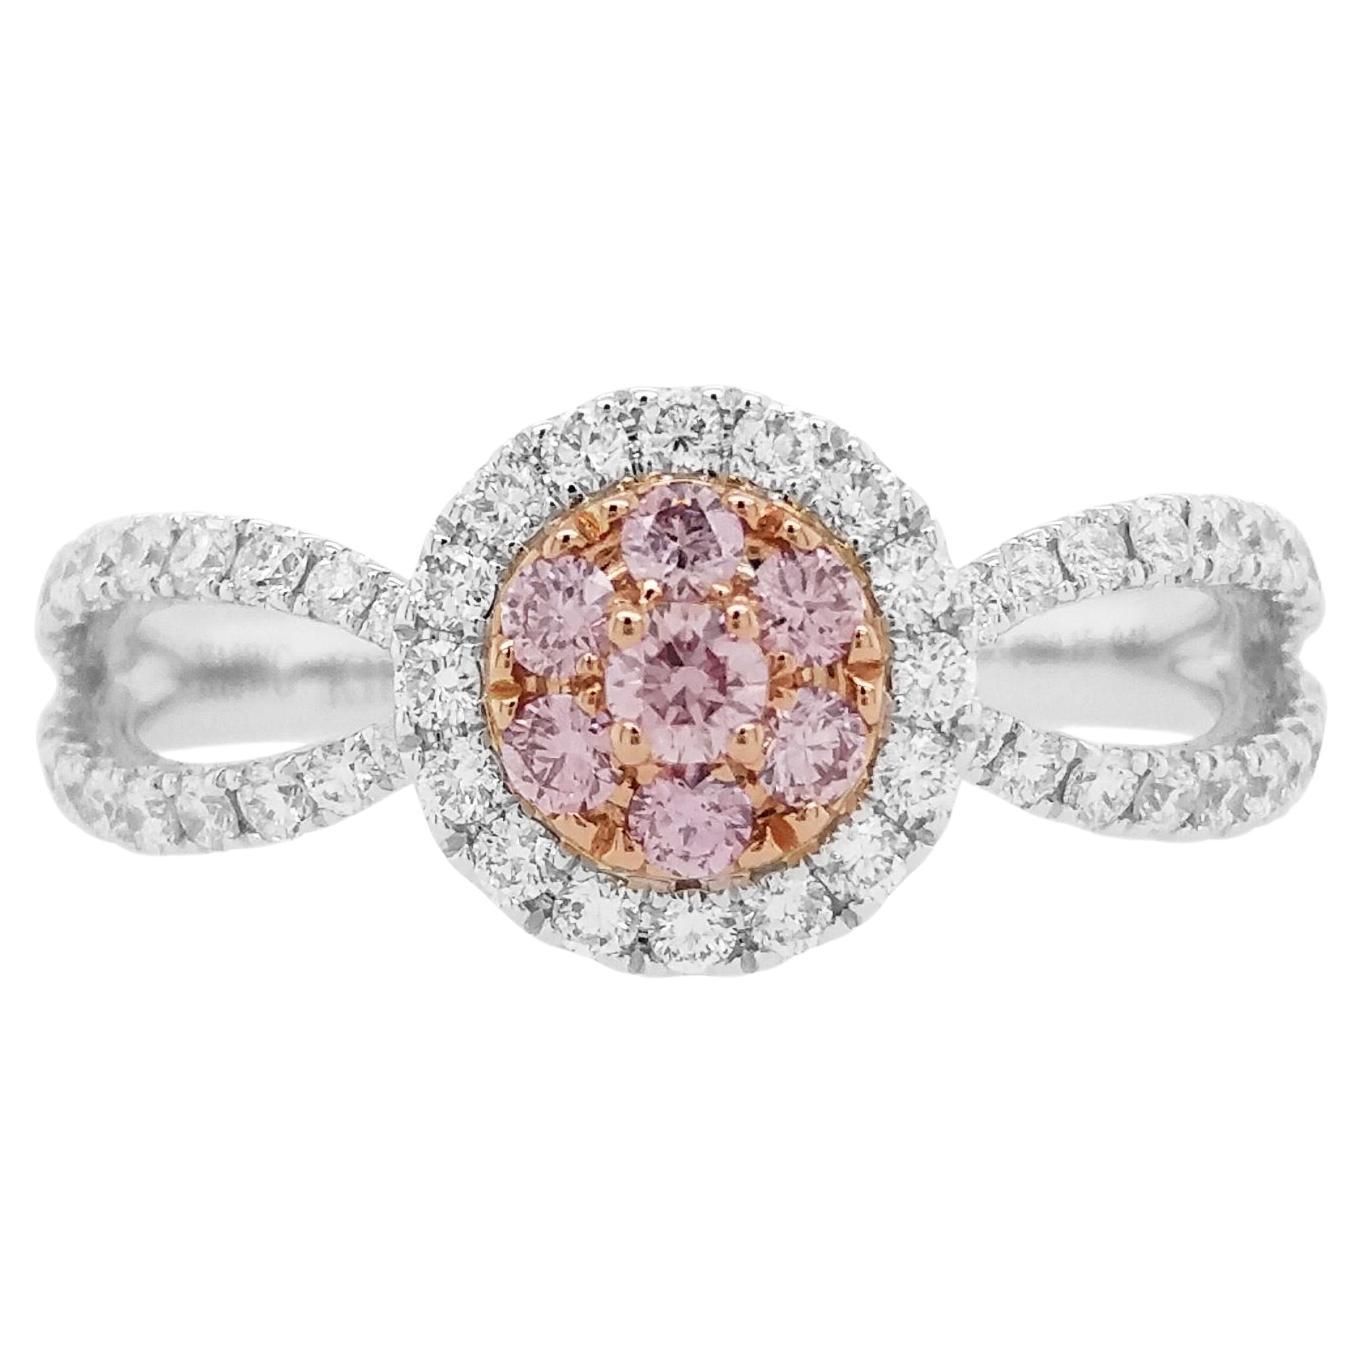 Pink Diamond & White Diamond Ring made in 18k Gold For Sale